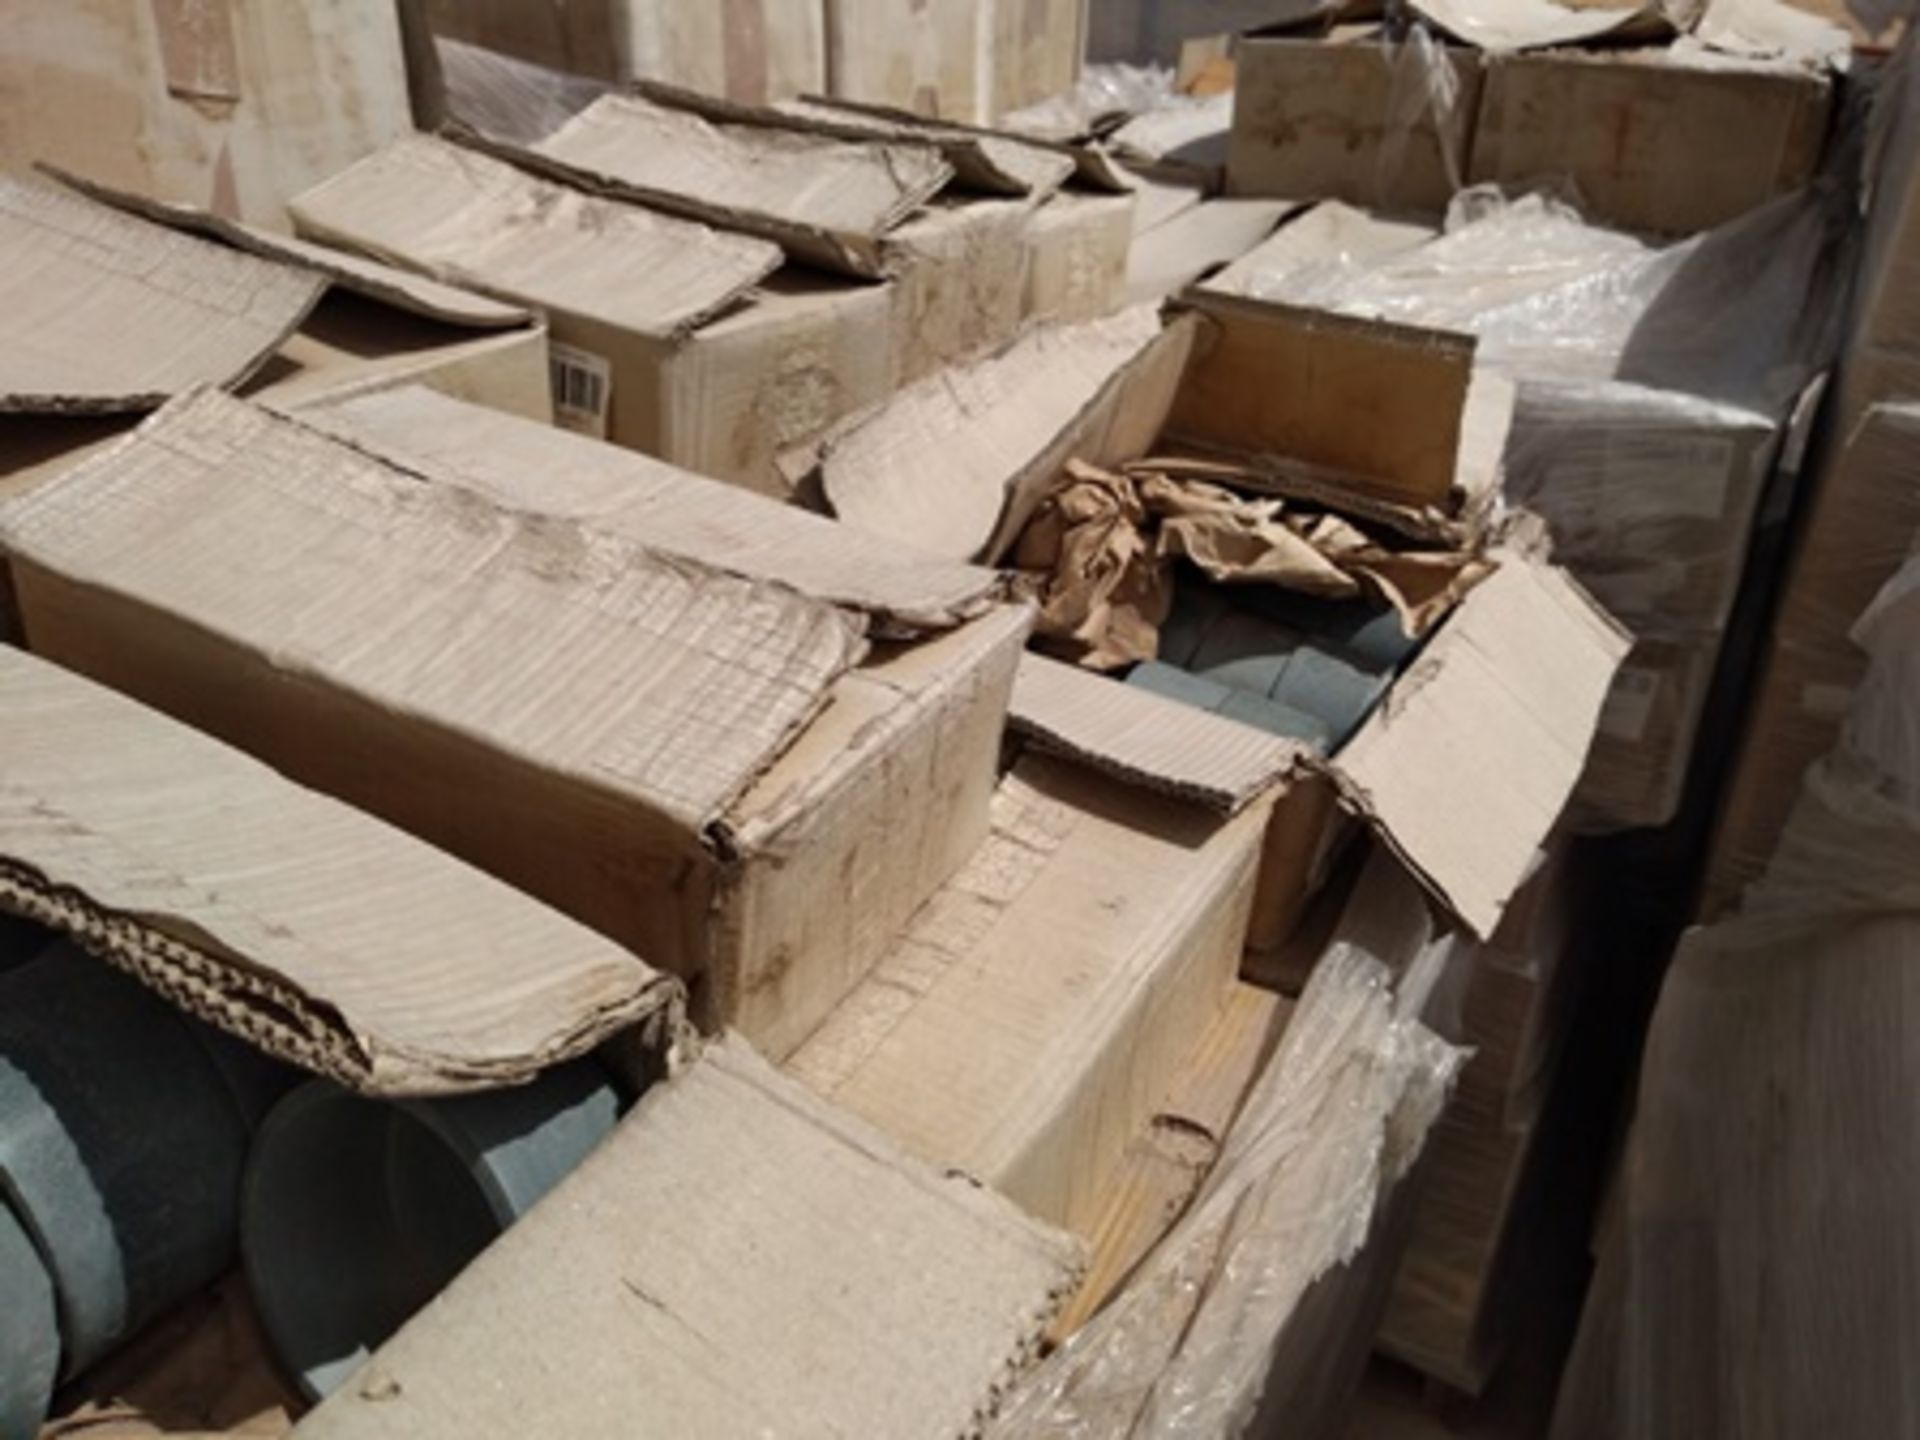 16 pallets containing: 500 boxes of finished product (egraved and shaped esteatita stones). - Image 11 of 12